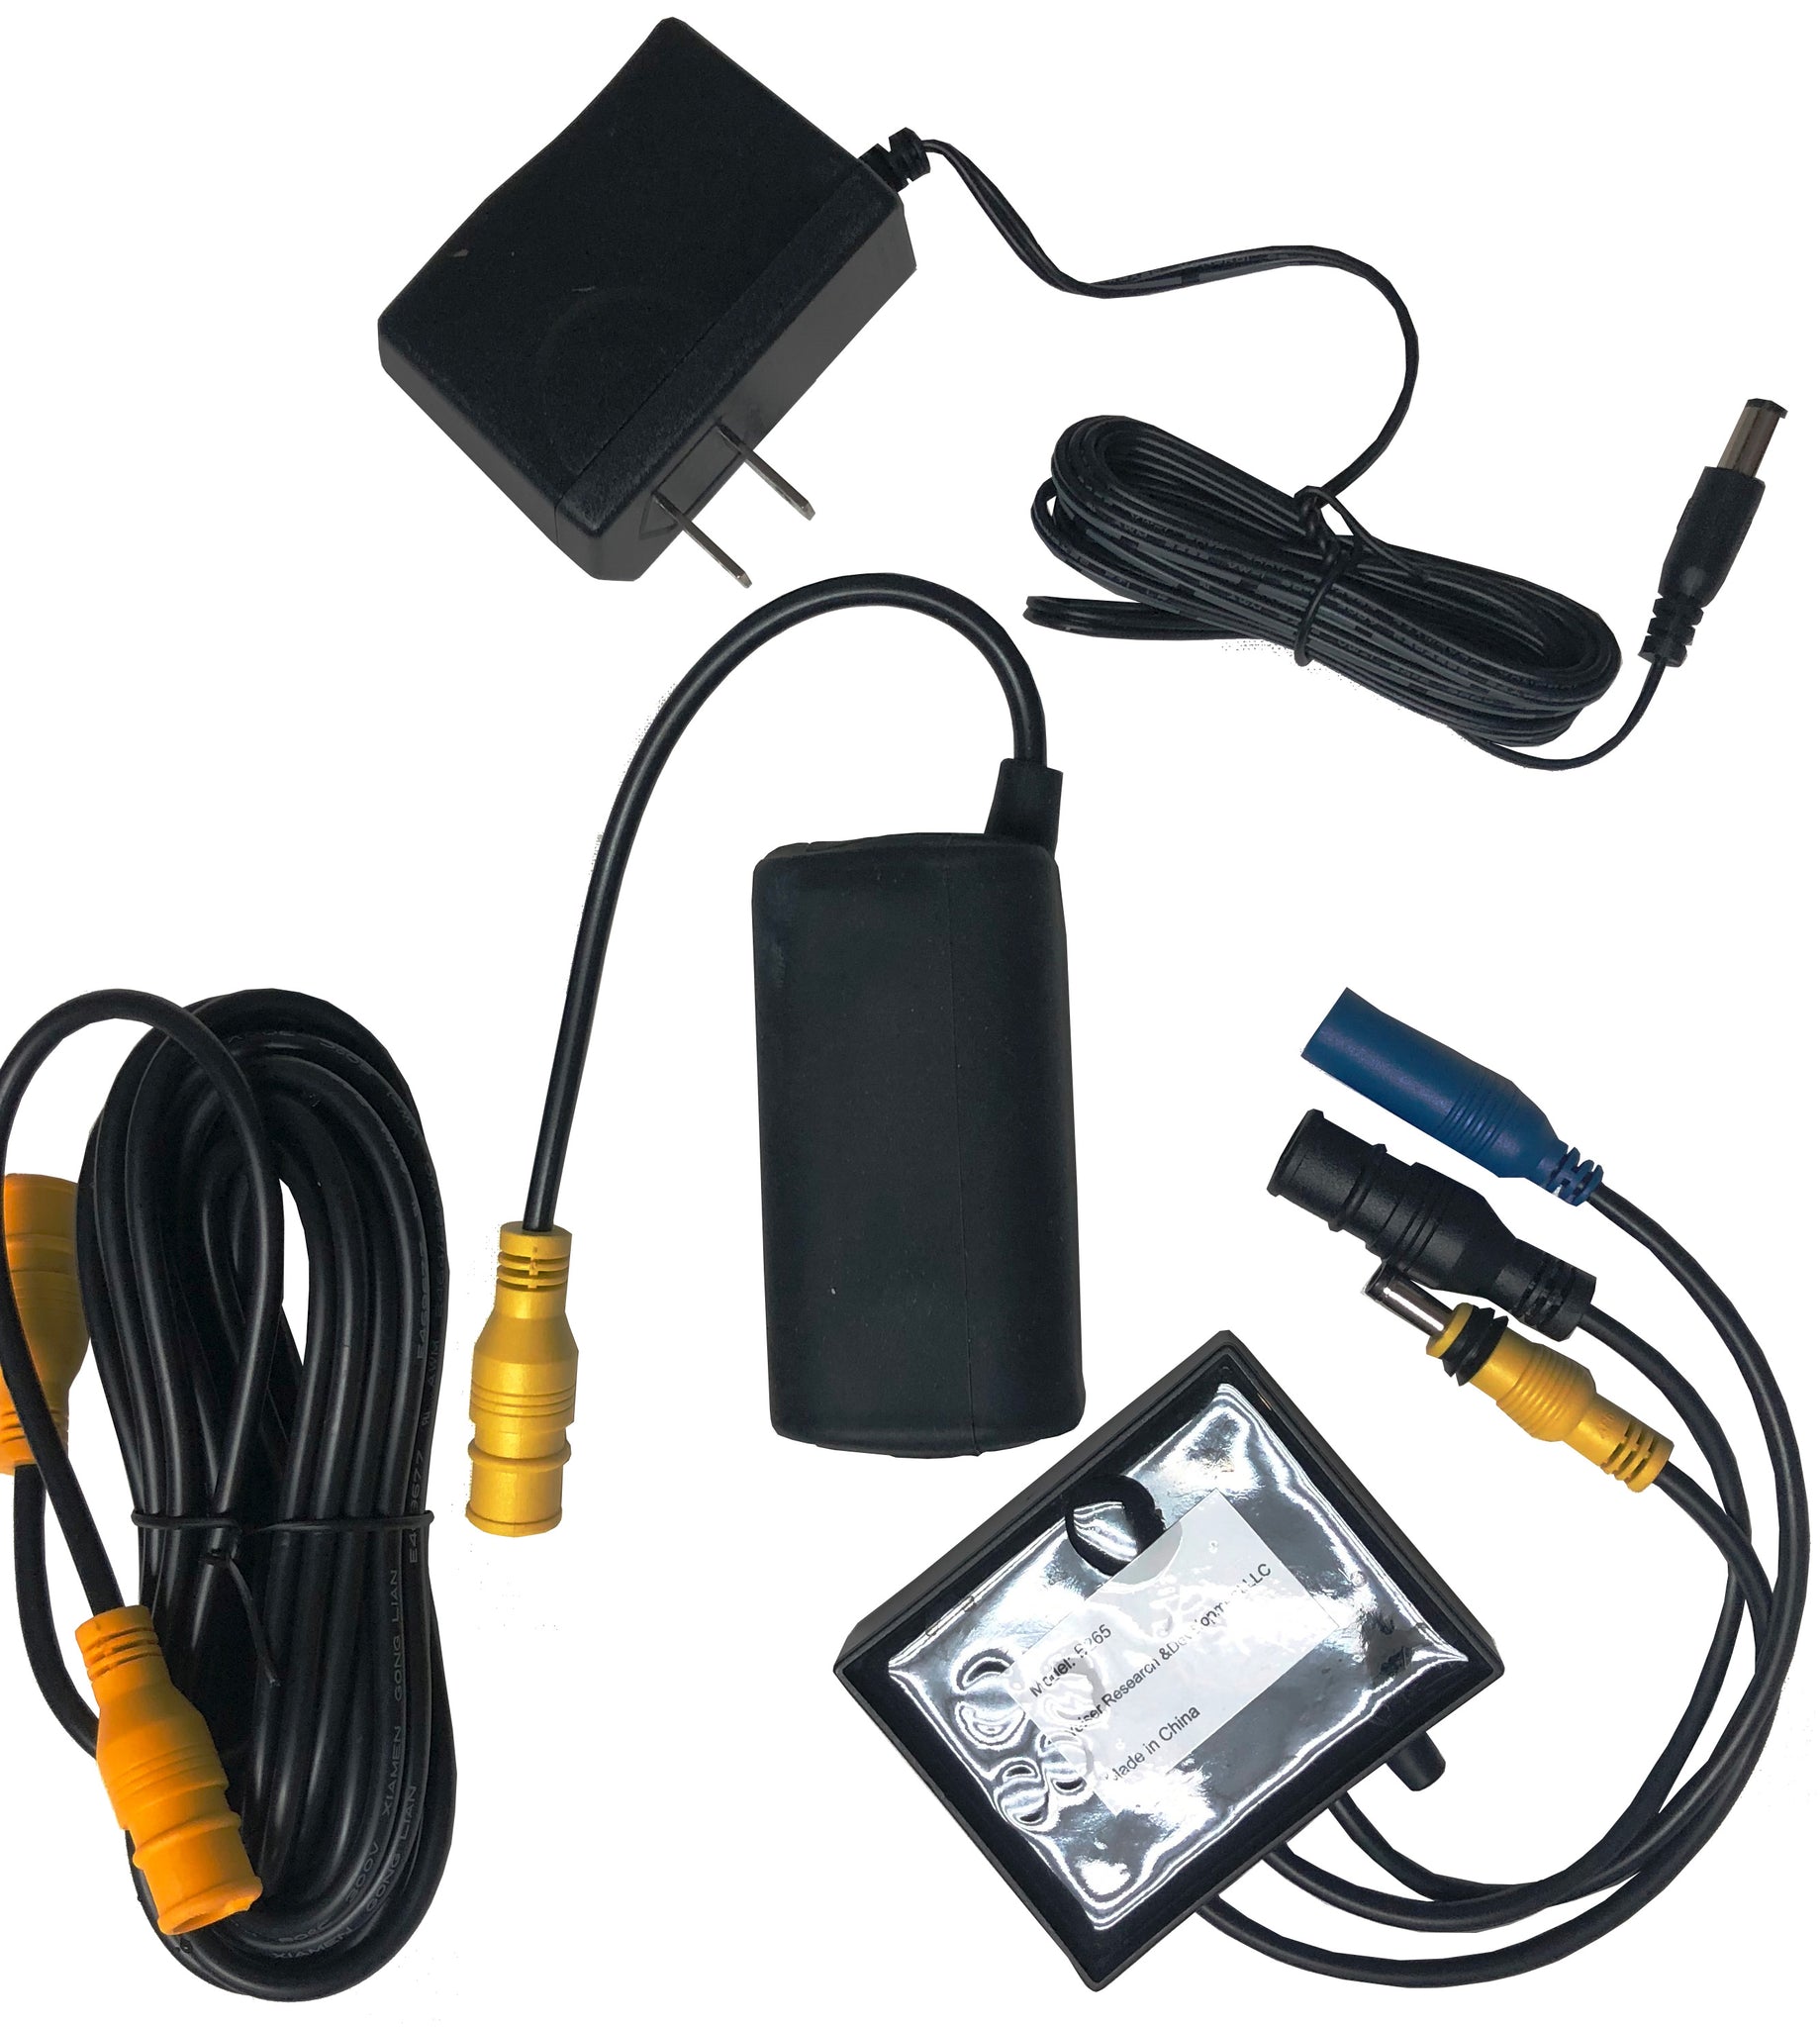 Lithium Ion Battery Conversion Kit - US only